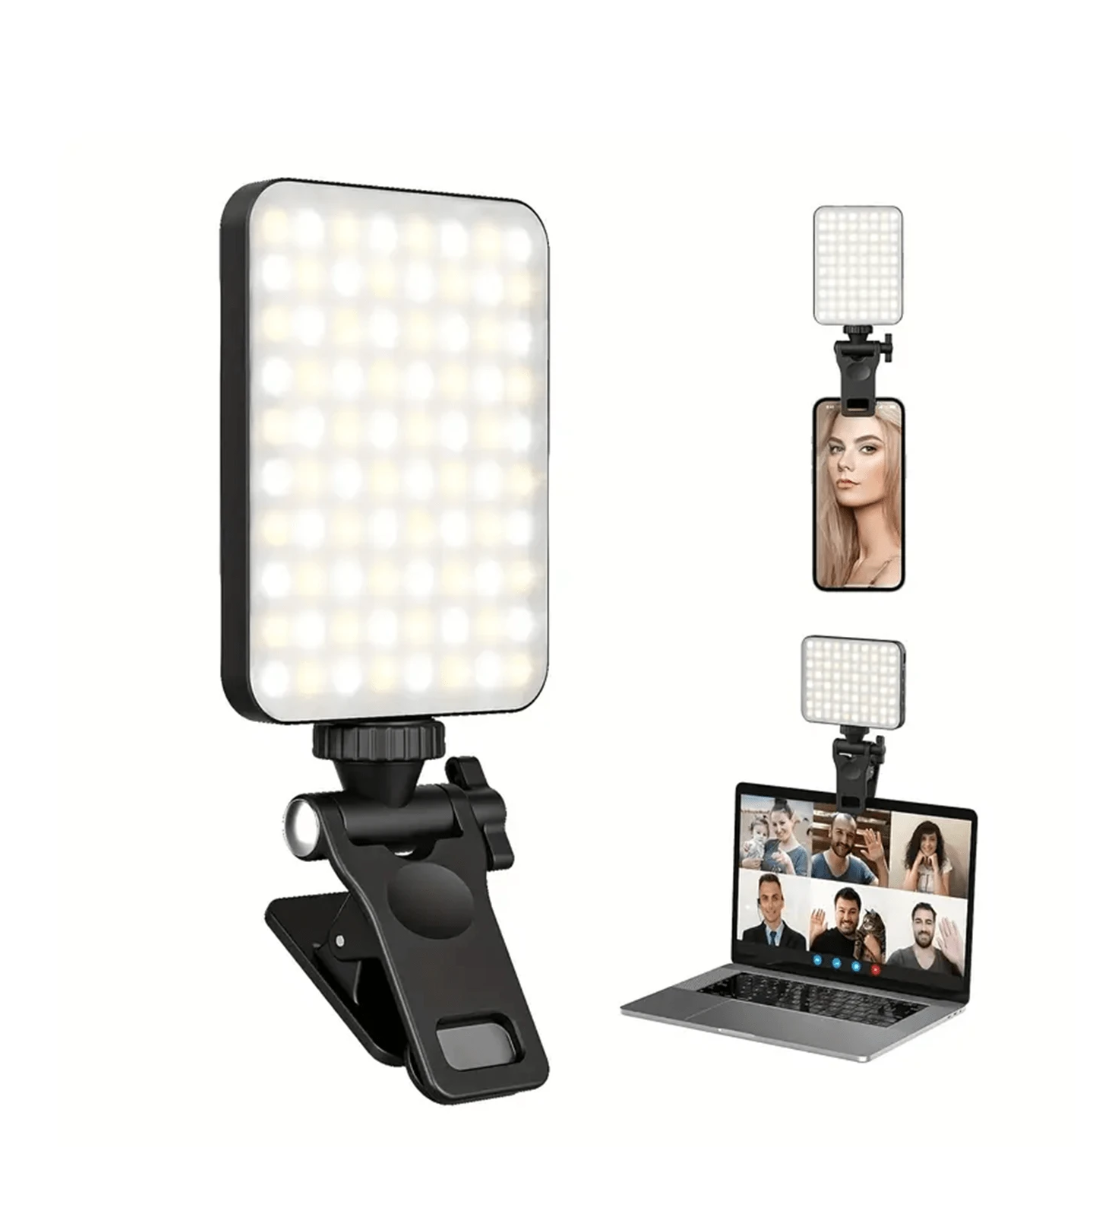 Glow On The Go: 80 LED Rechargeable Selfie Light Clip – Perfect Illumination for iPhone, Phone, Tablet, Laptop – Enhance Your Selfies, Makeup, Vlogs, and Video Conferences!